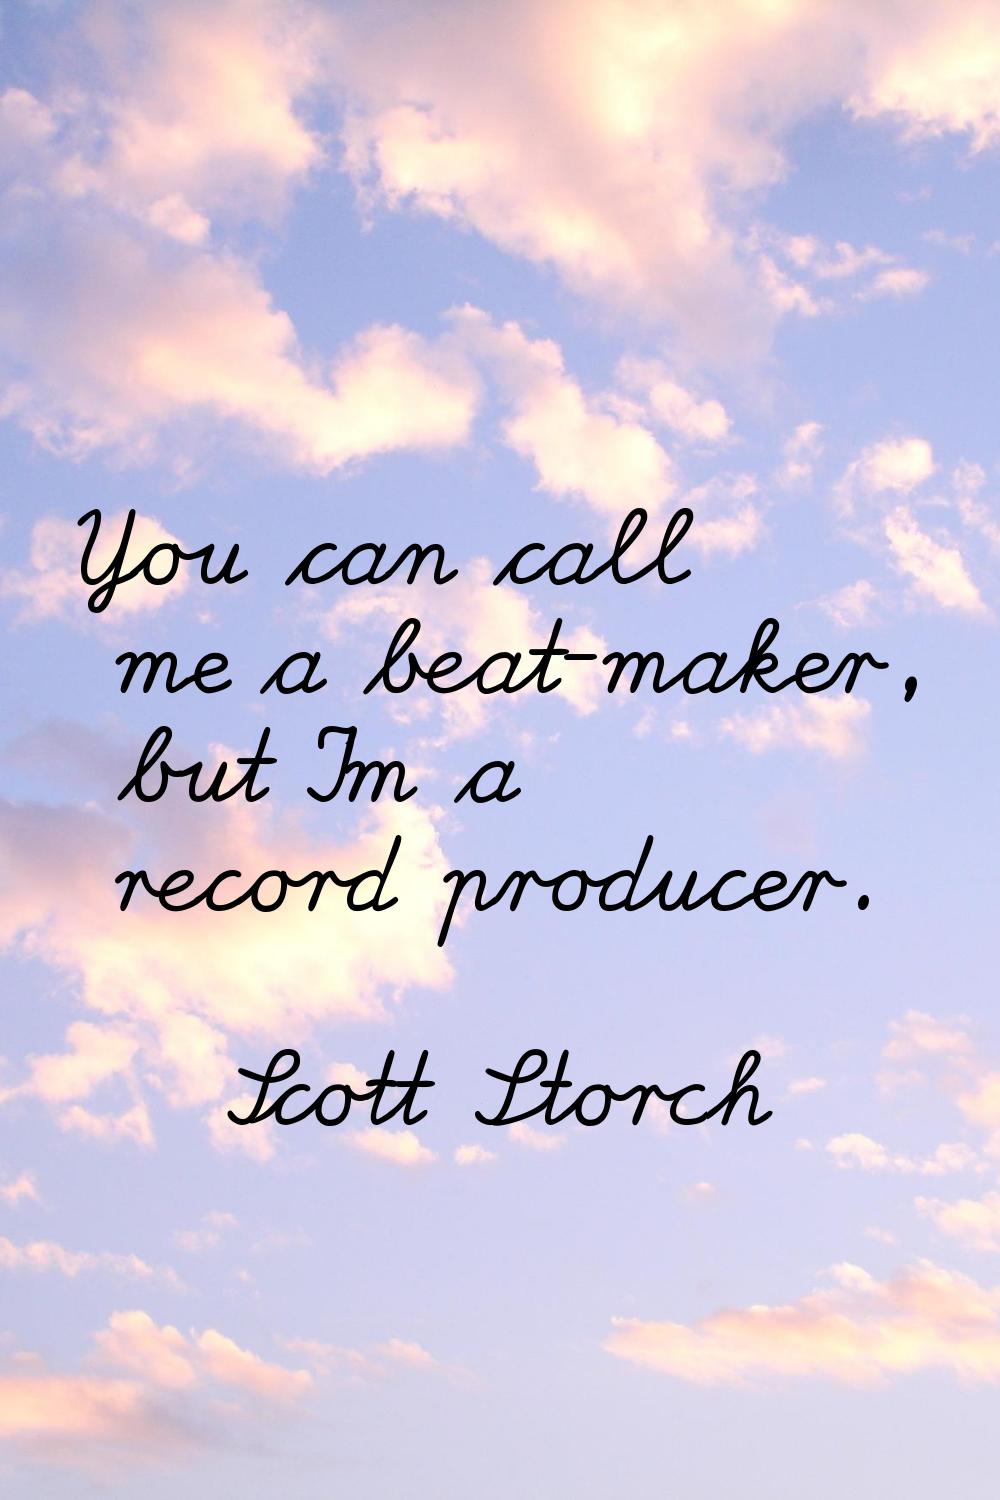 You can call me a beat-maker, but I'm a record producer.